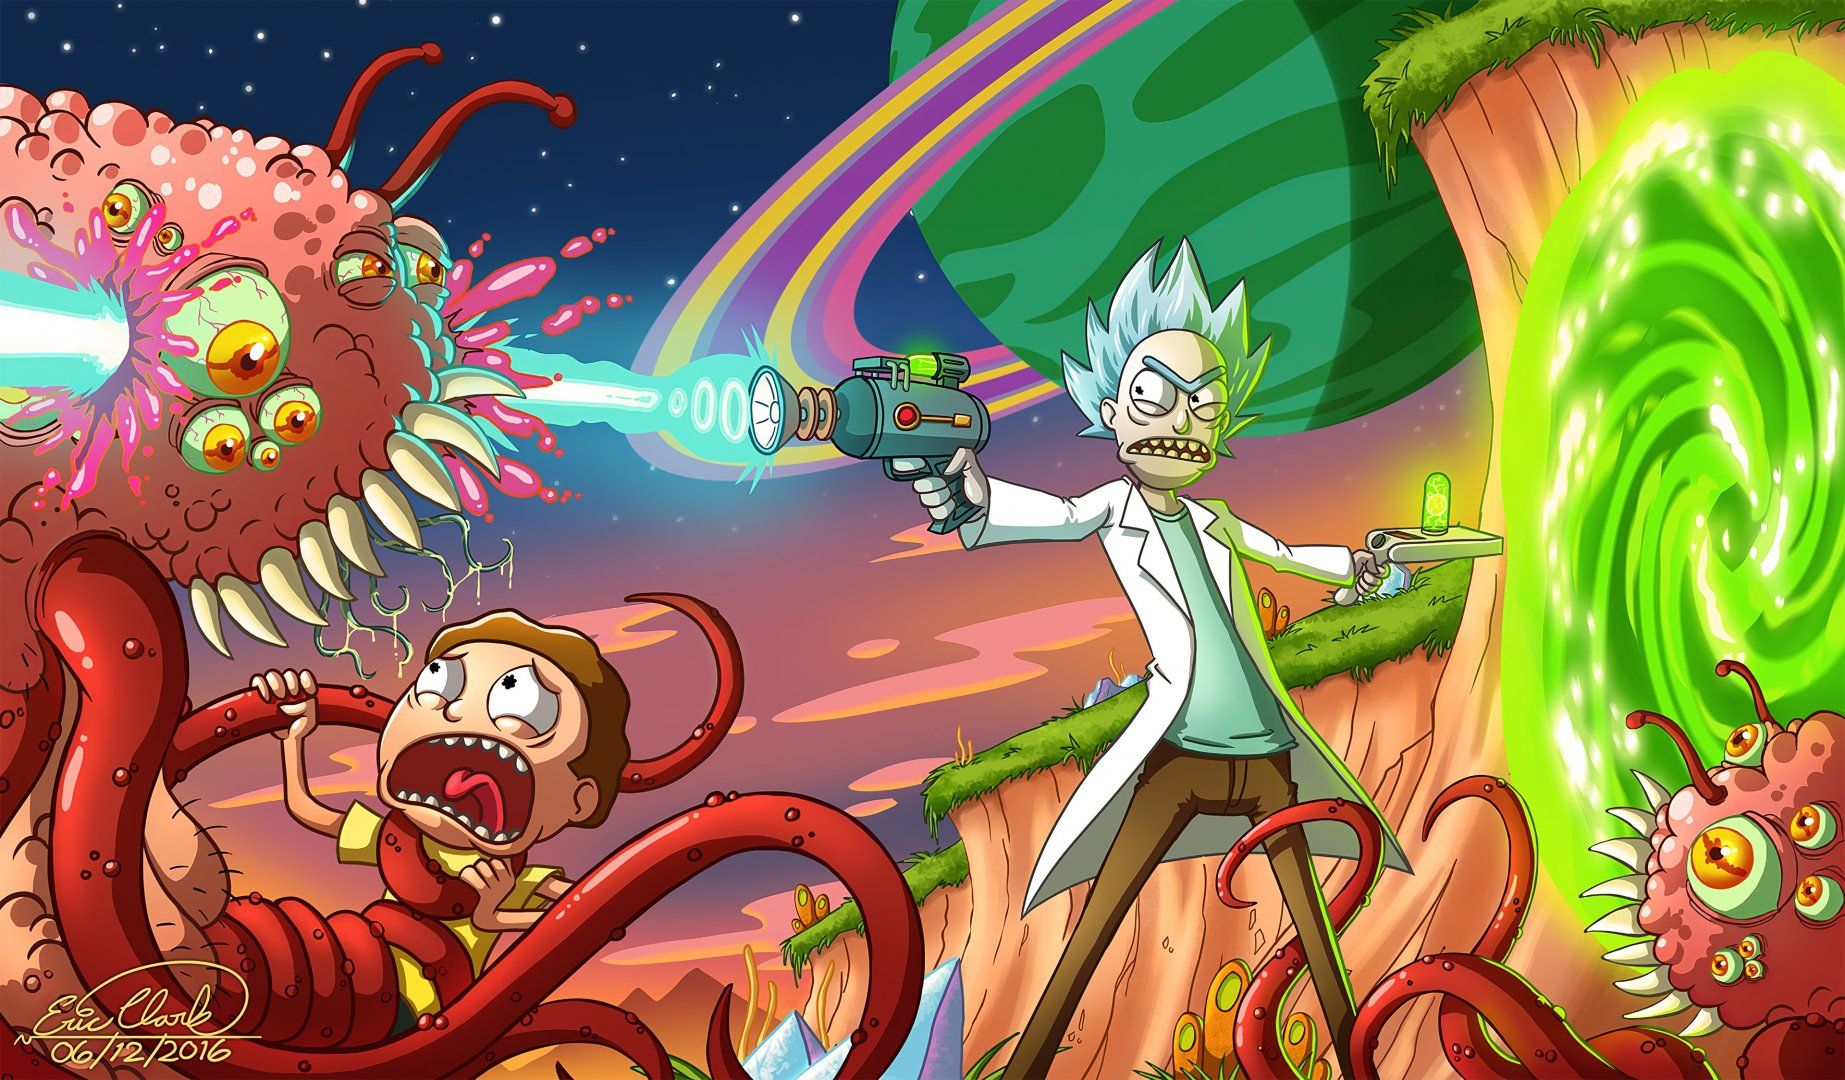 rick-and-morty-smith-adventures_1580056495.jpg